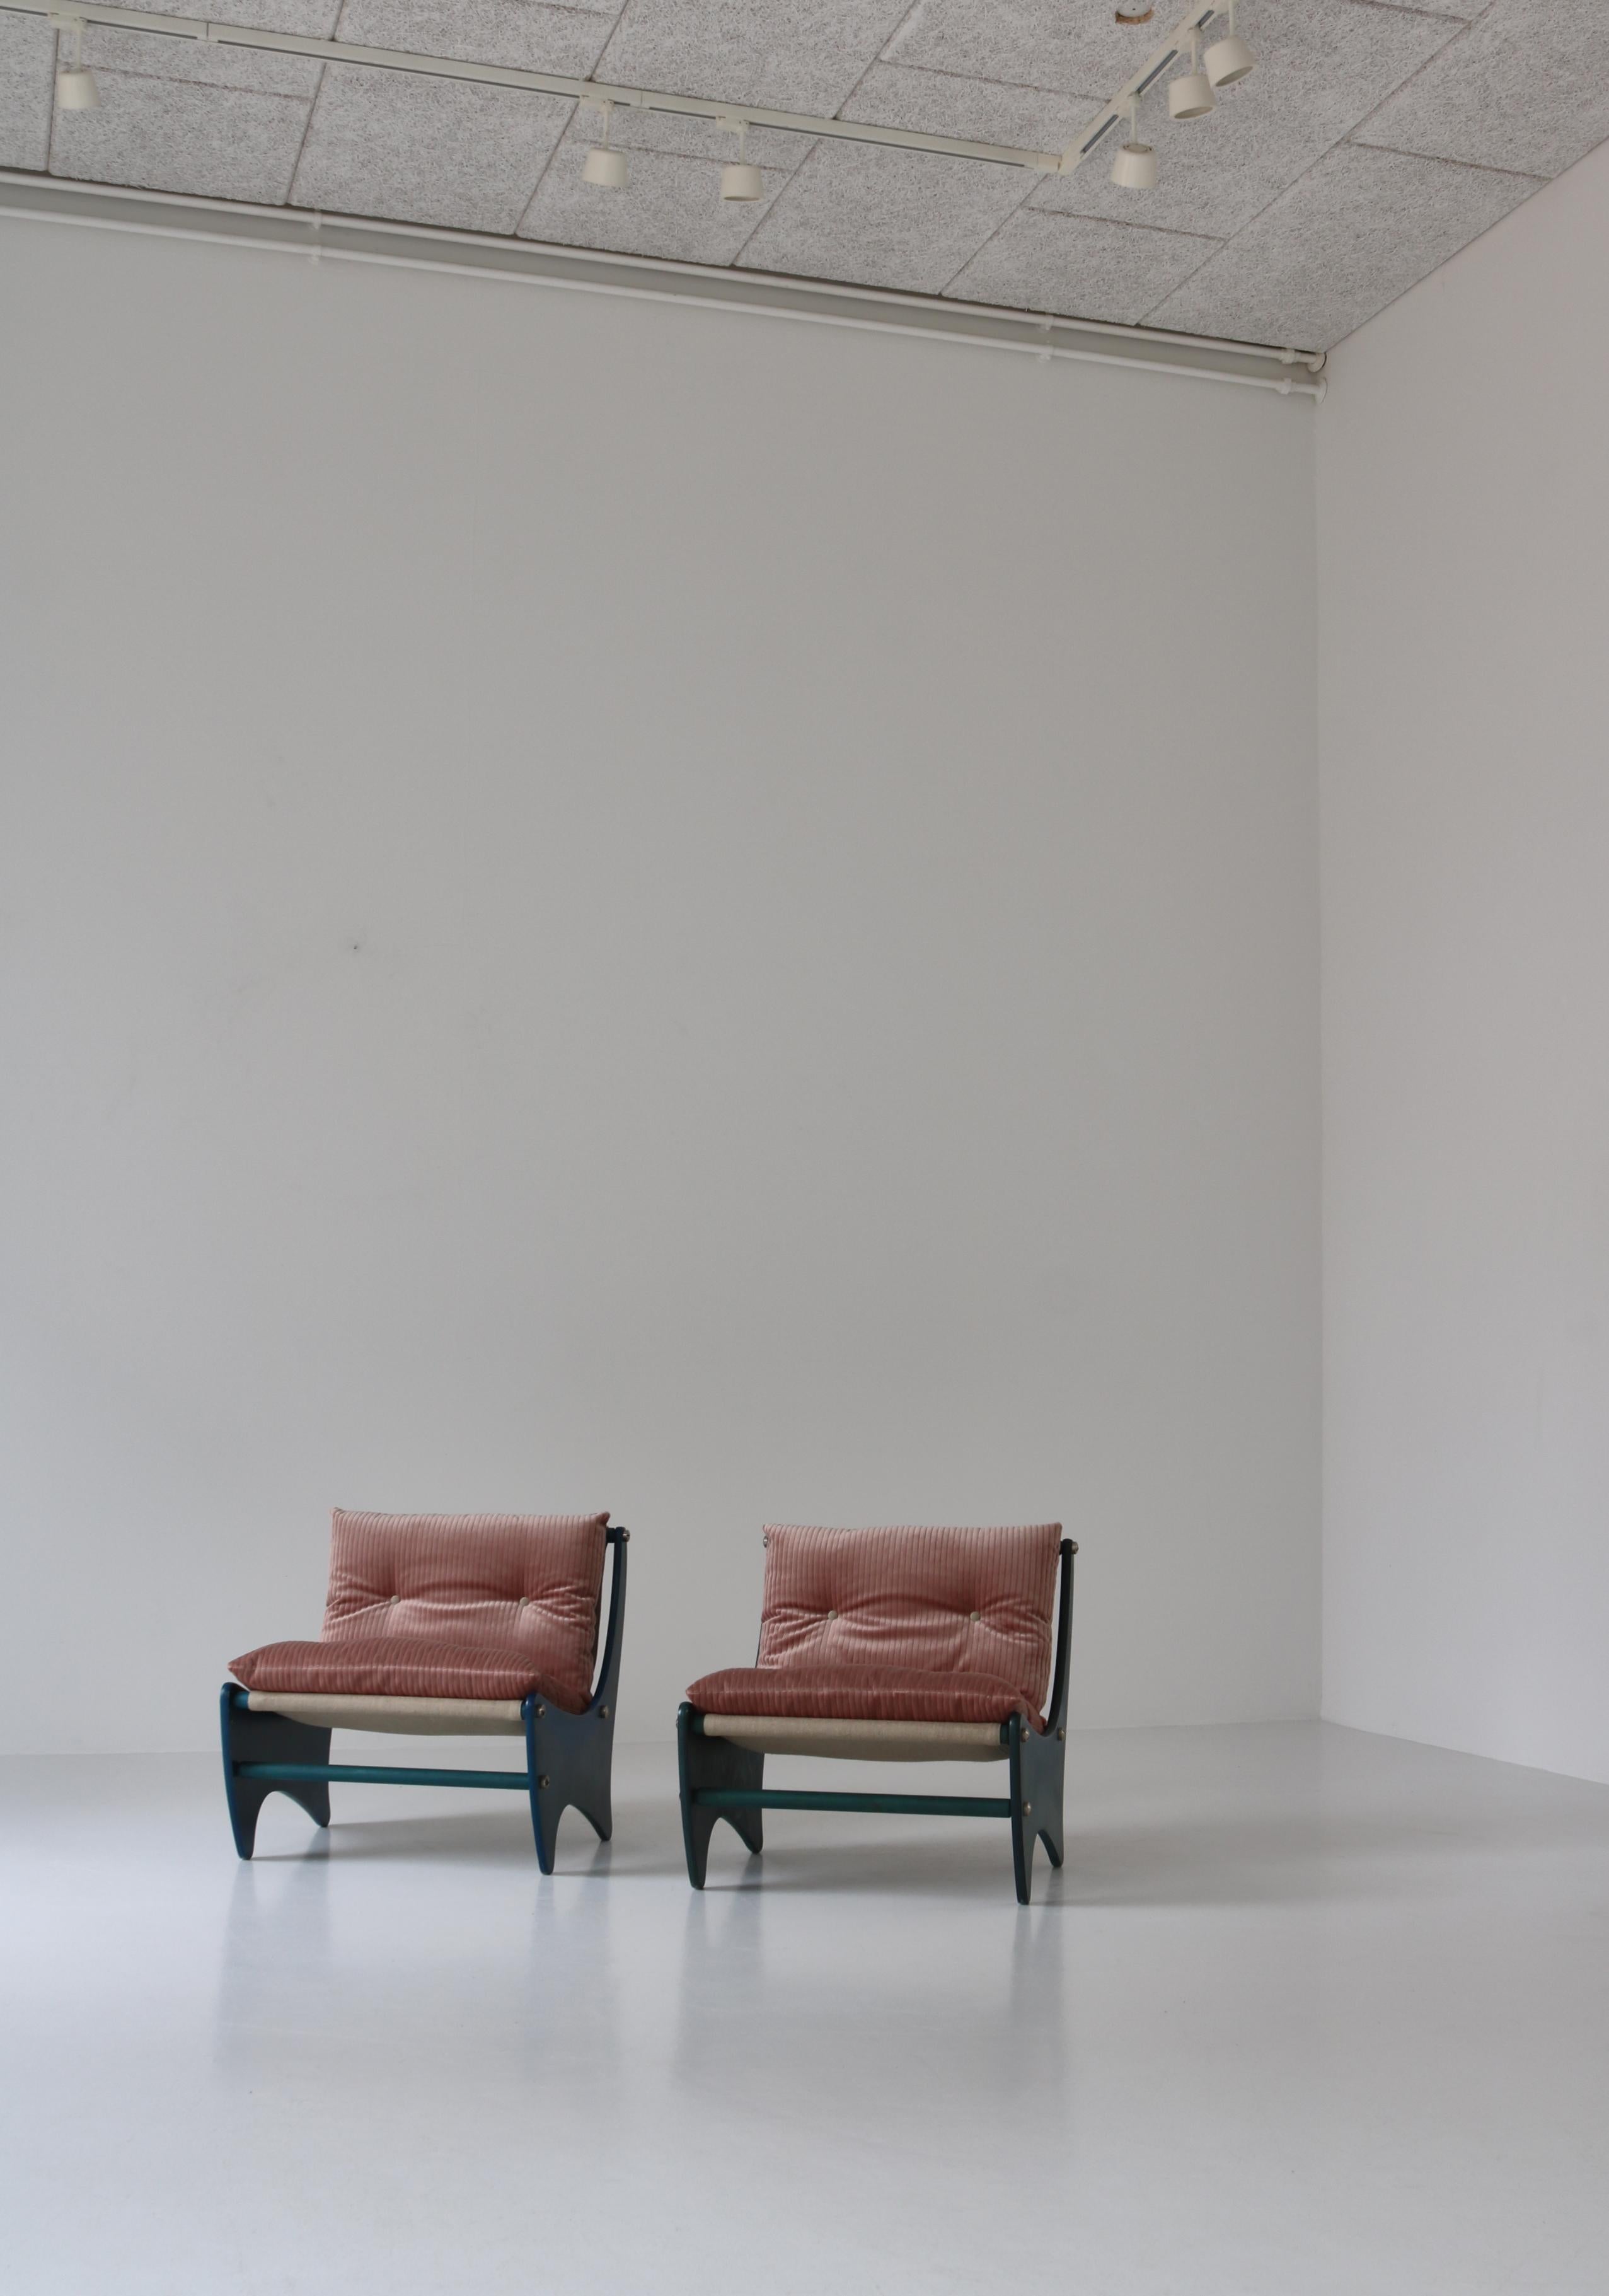 Charming pair of vintage lounge chairs made in Denmark in the 1960s. The chairs are made from blue stained plywood and the original cushions have been upholstered in pink velvet. The designer is not identified, but the organic space-age design looks